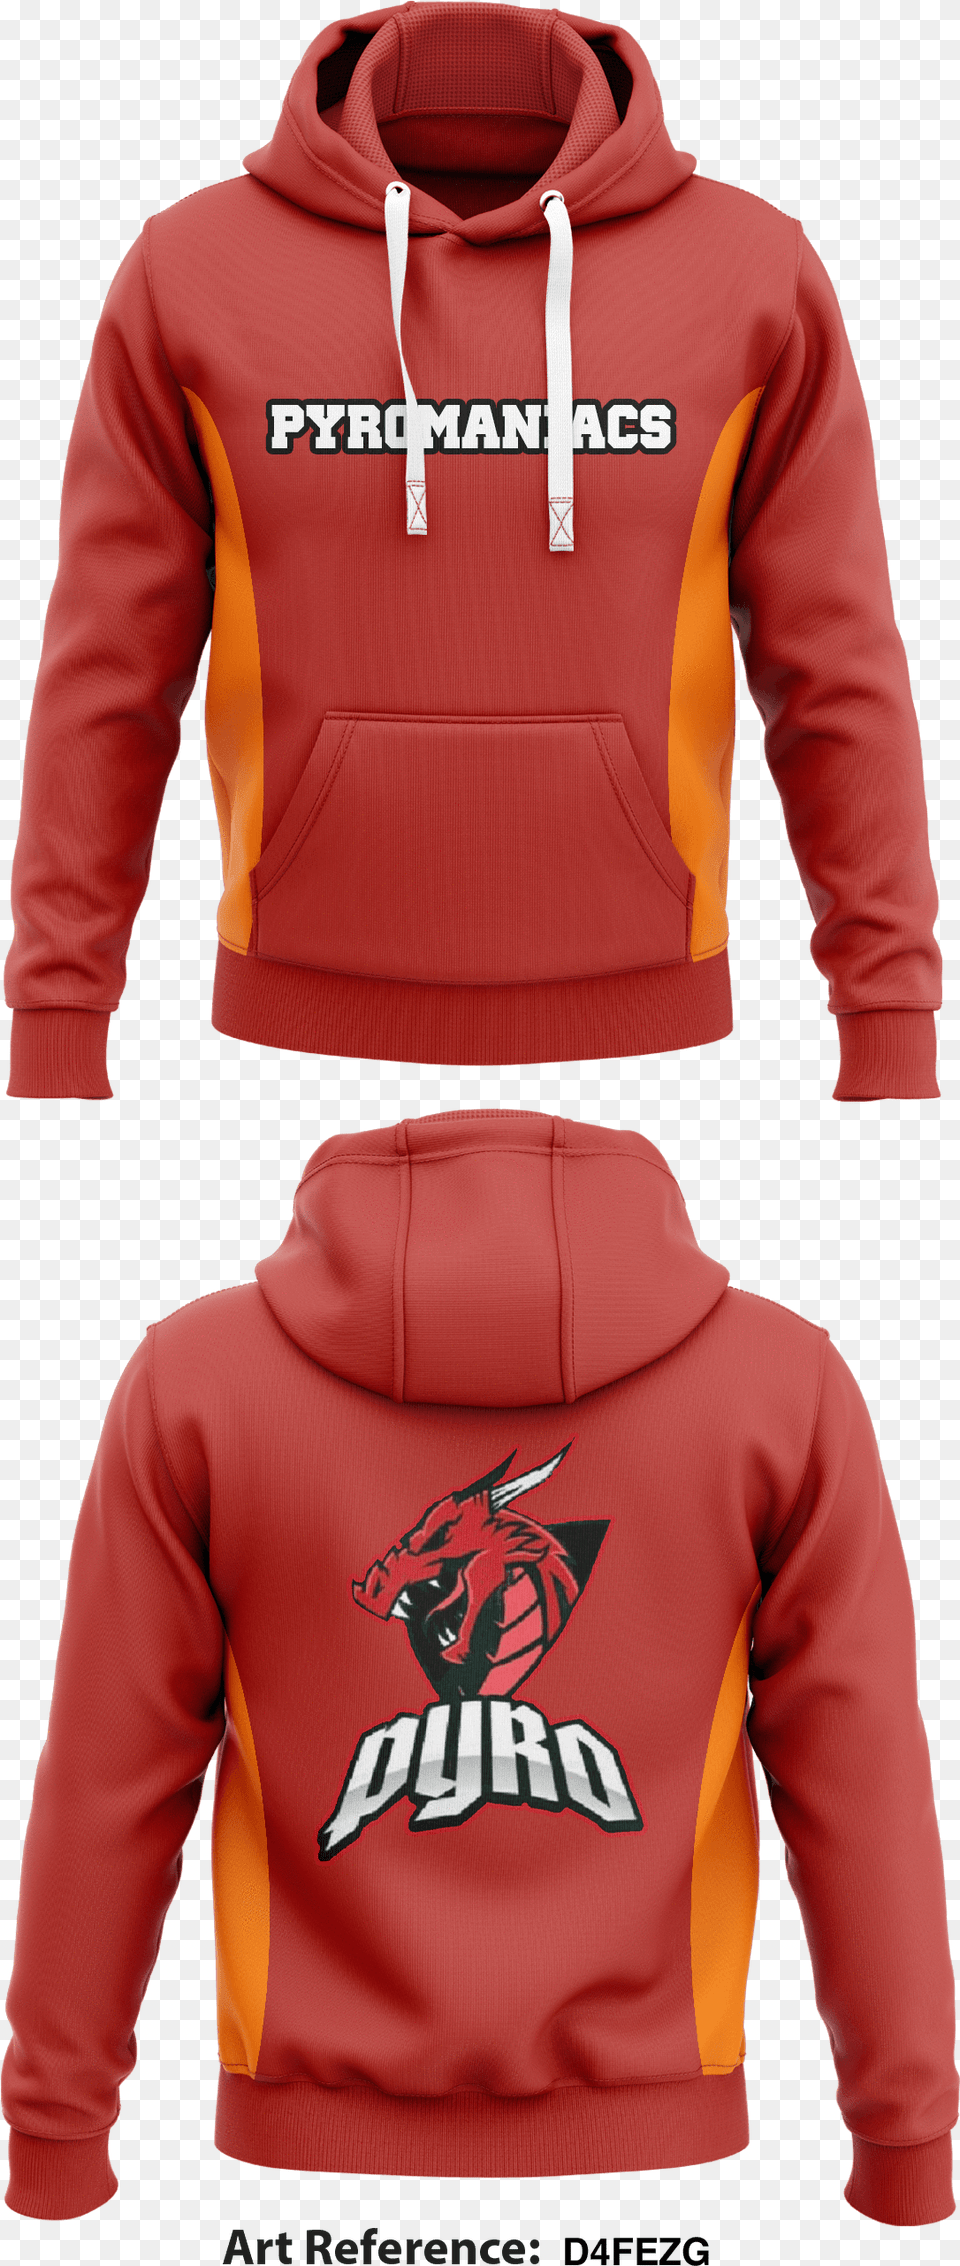 Pyro Hoodie D4fezgclass Lazyload Lazyload Fade In National Junior Honor Society Hoodie, Clothing, Hood, Knitwear, Sweater Png